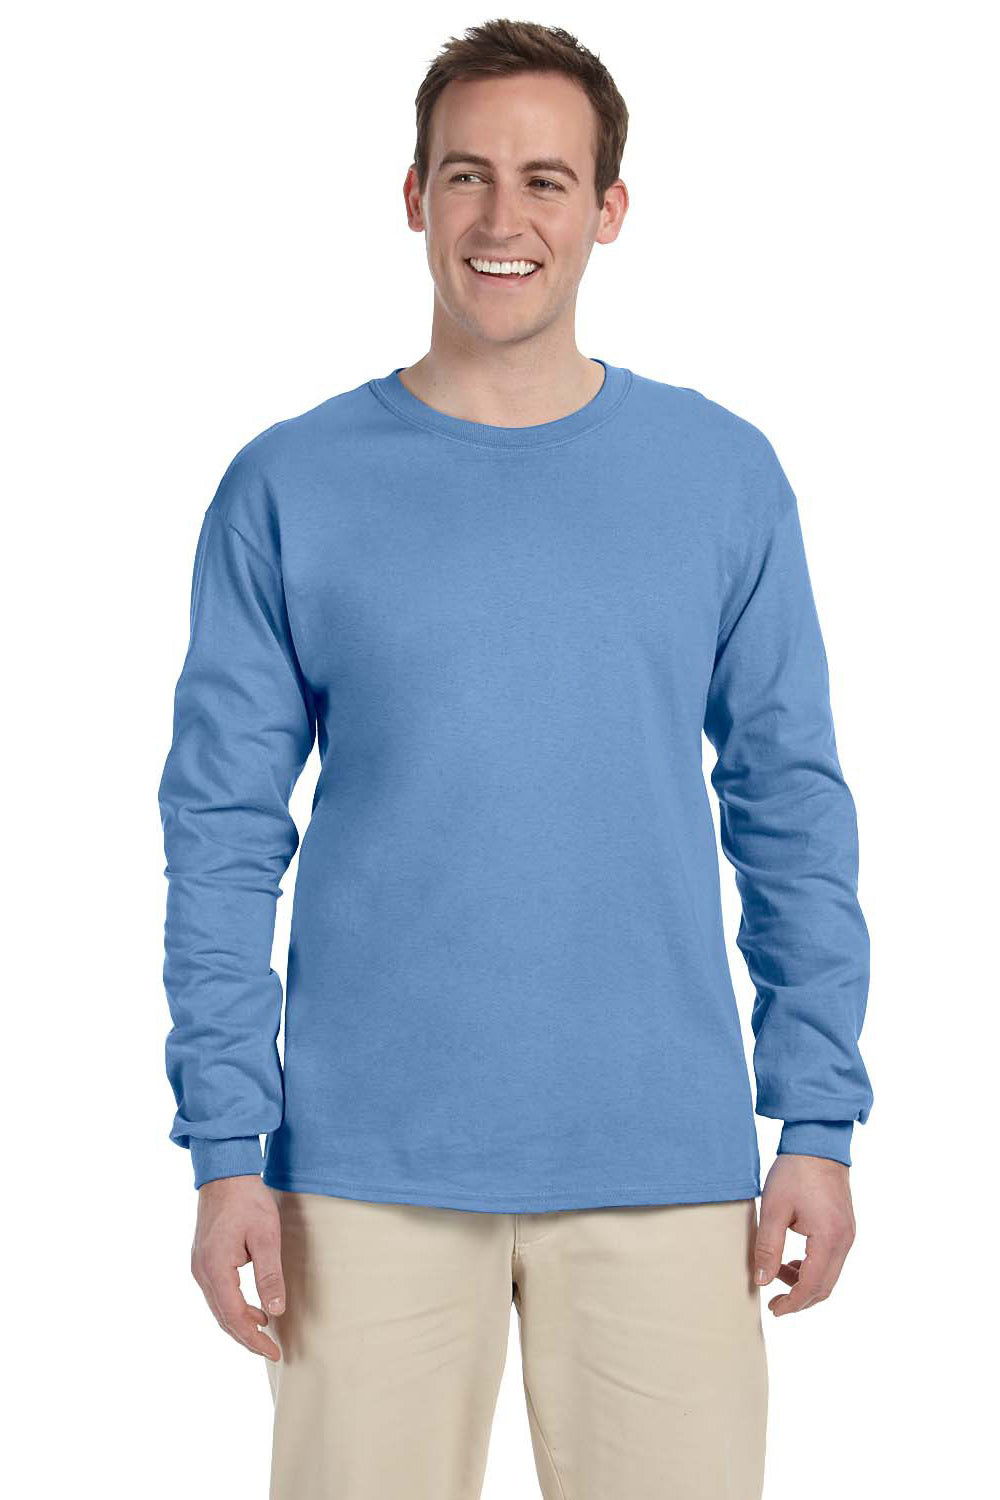 Fruit Of The Loom 4930 Mens HD Jersey Long Sleeve Crewneck T-Shirt Columbia Blue Front